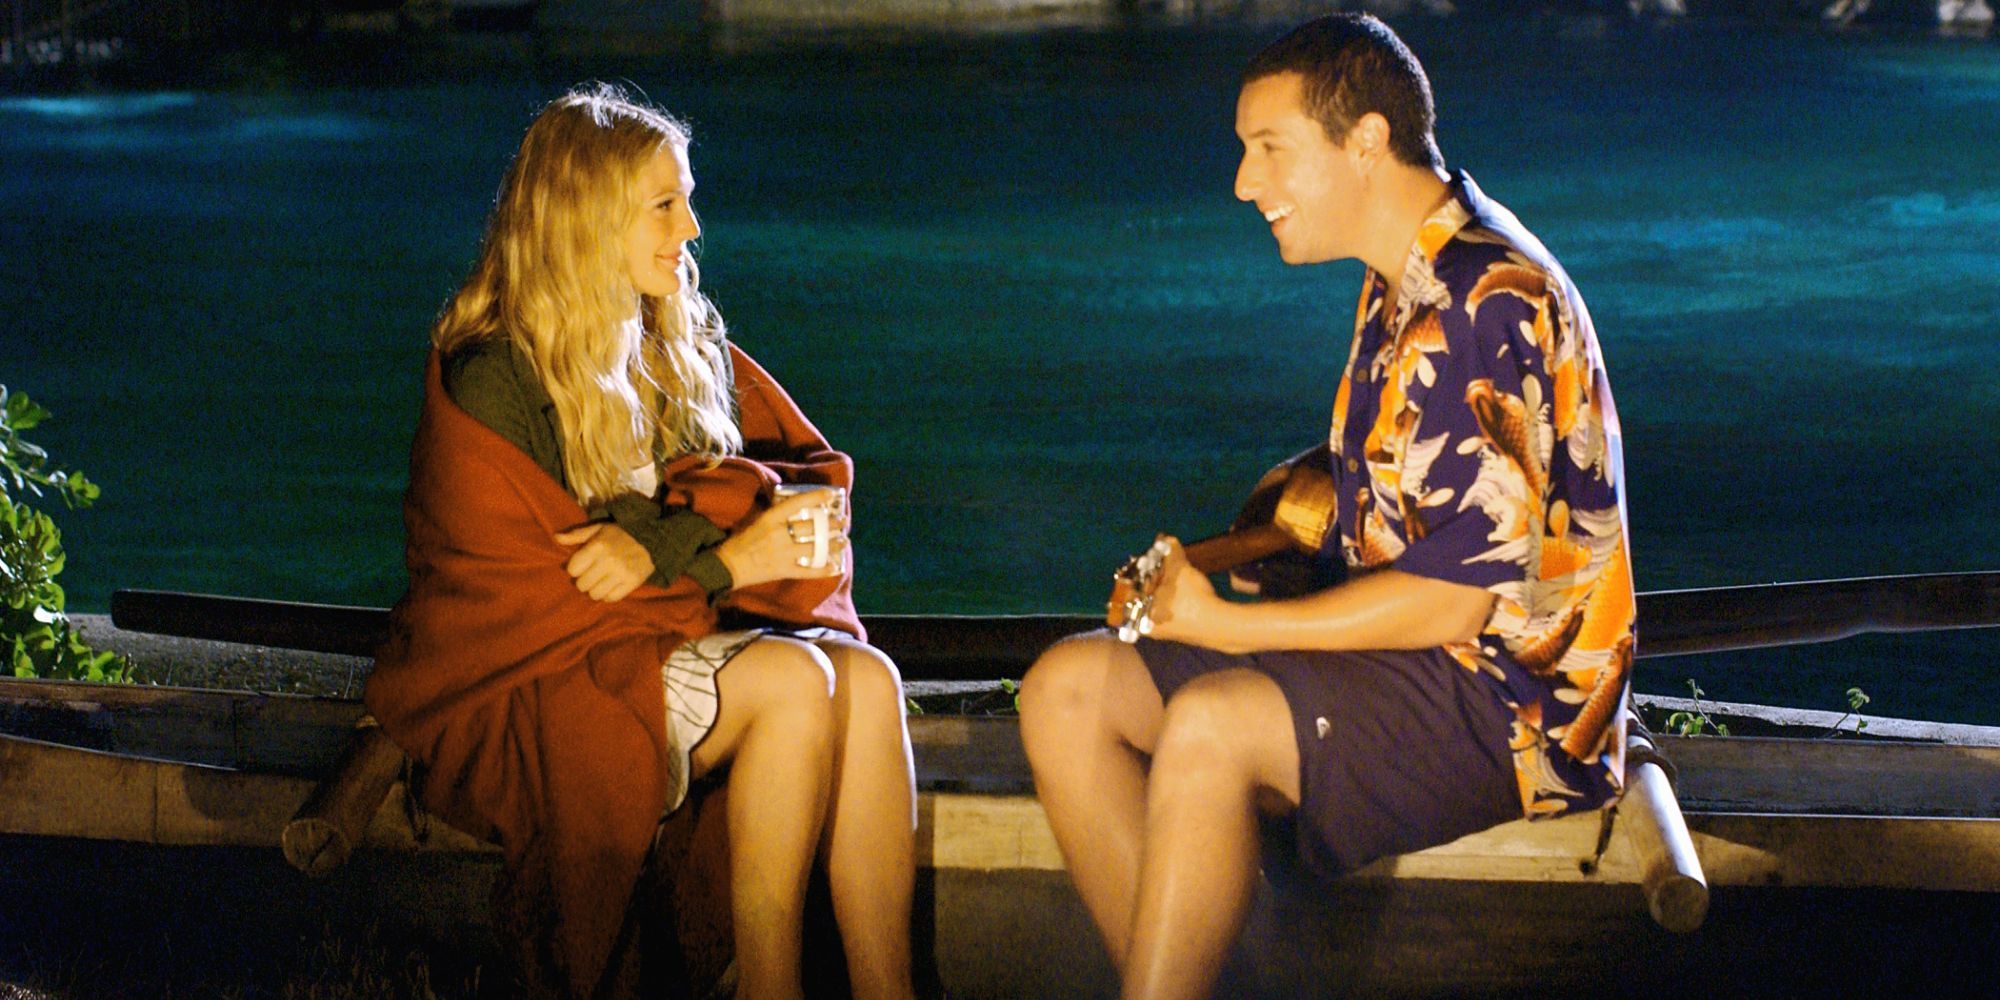 Drew Barrymore and Adam Sandler as Lucy and Henry sitting by a beach bonfire in 50 First Dates’ (2004) 